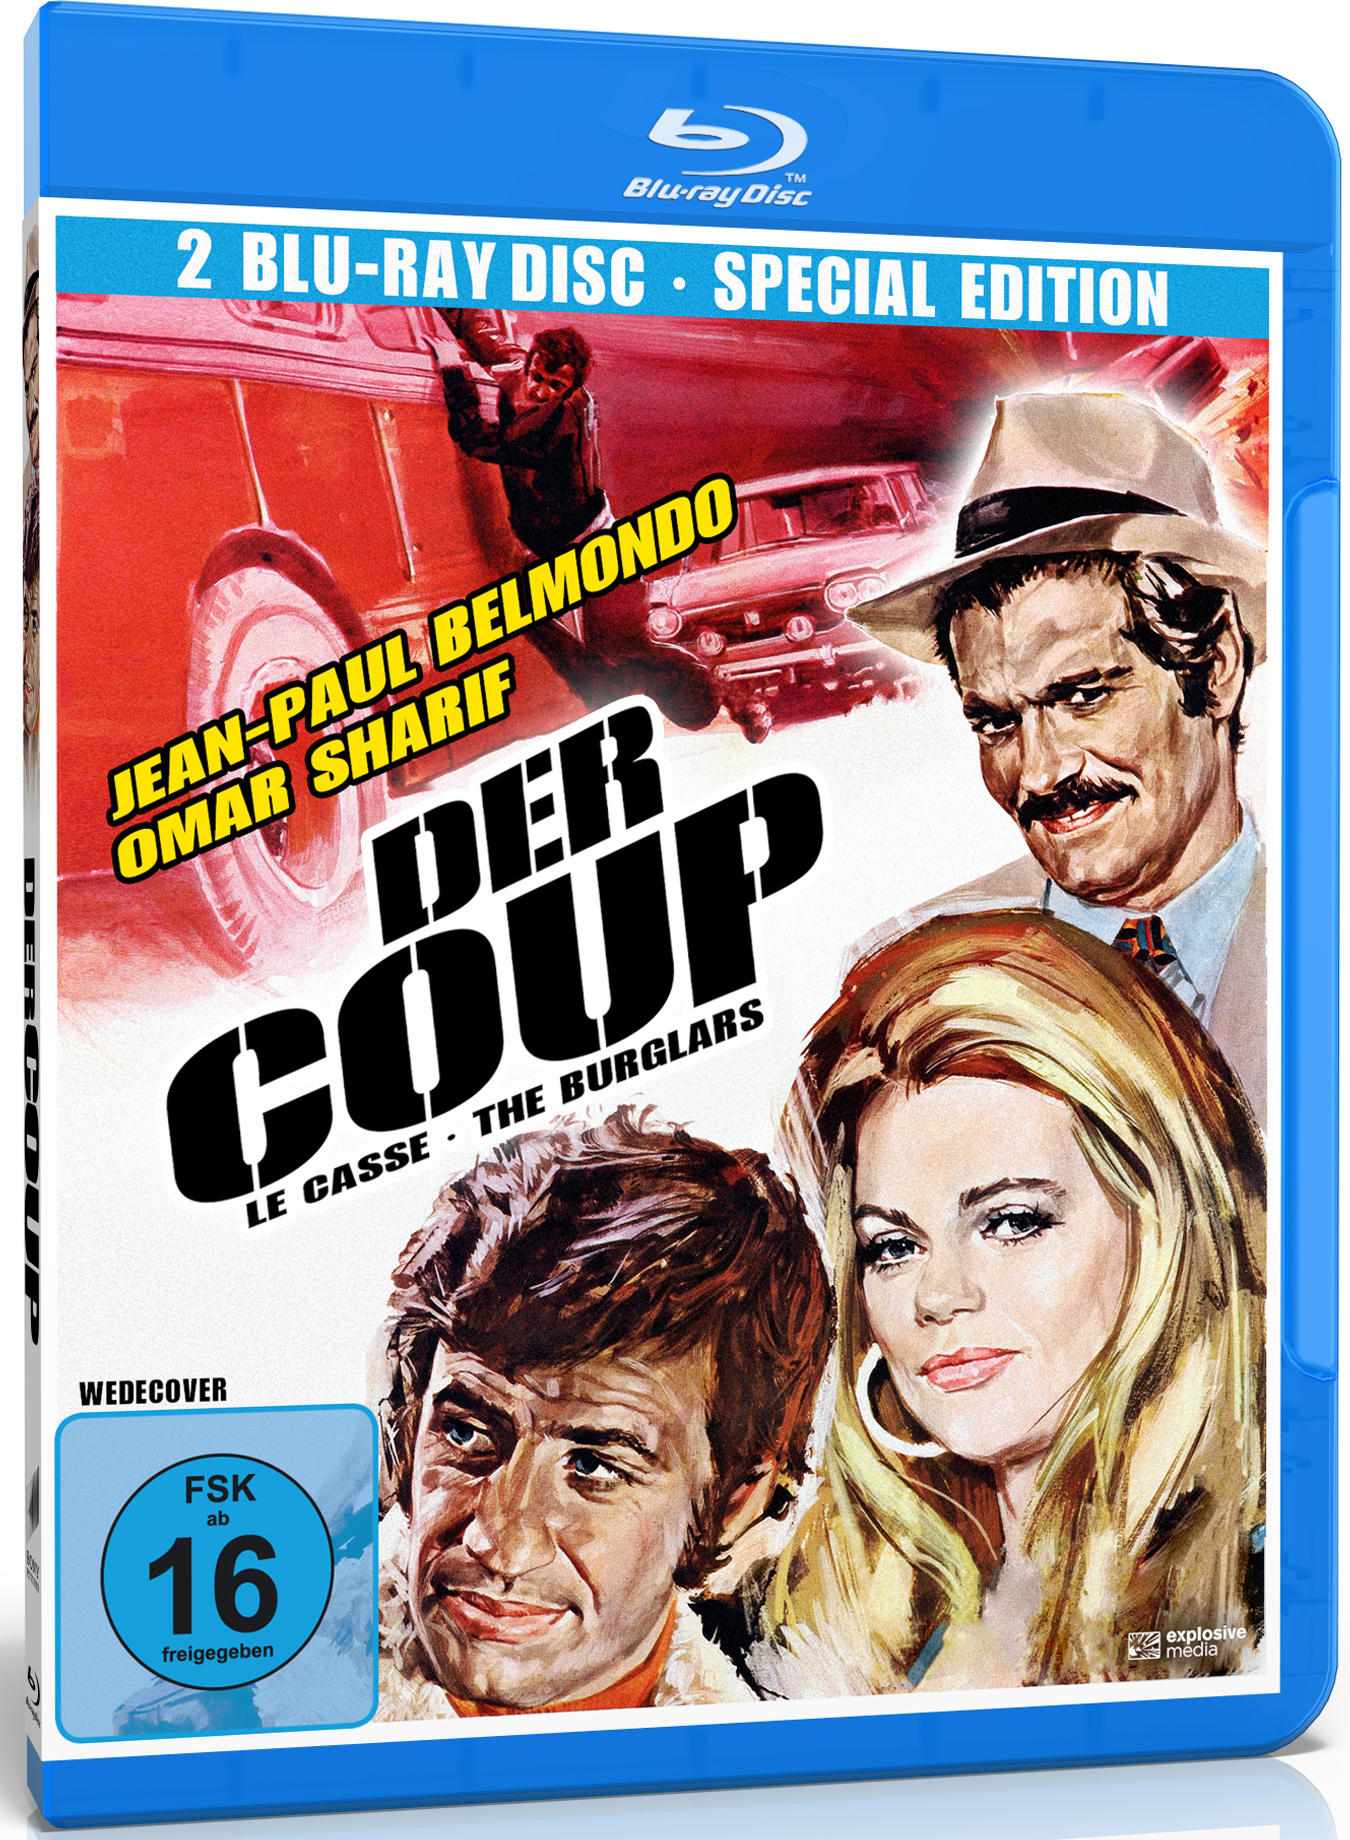 Der Blu-ray Coup